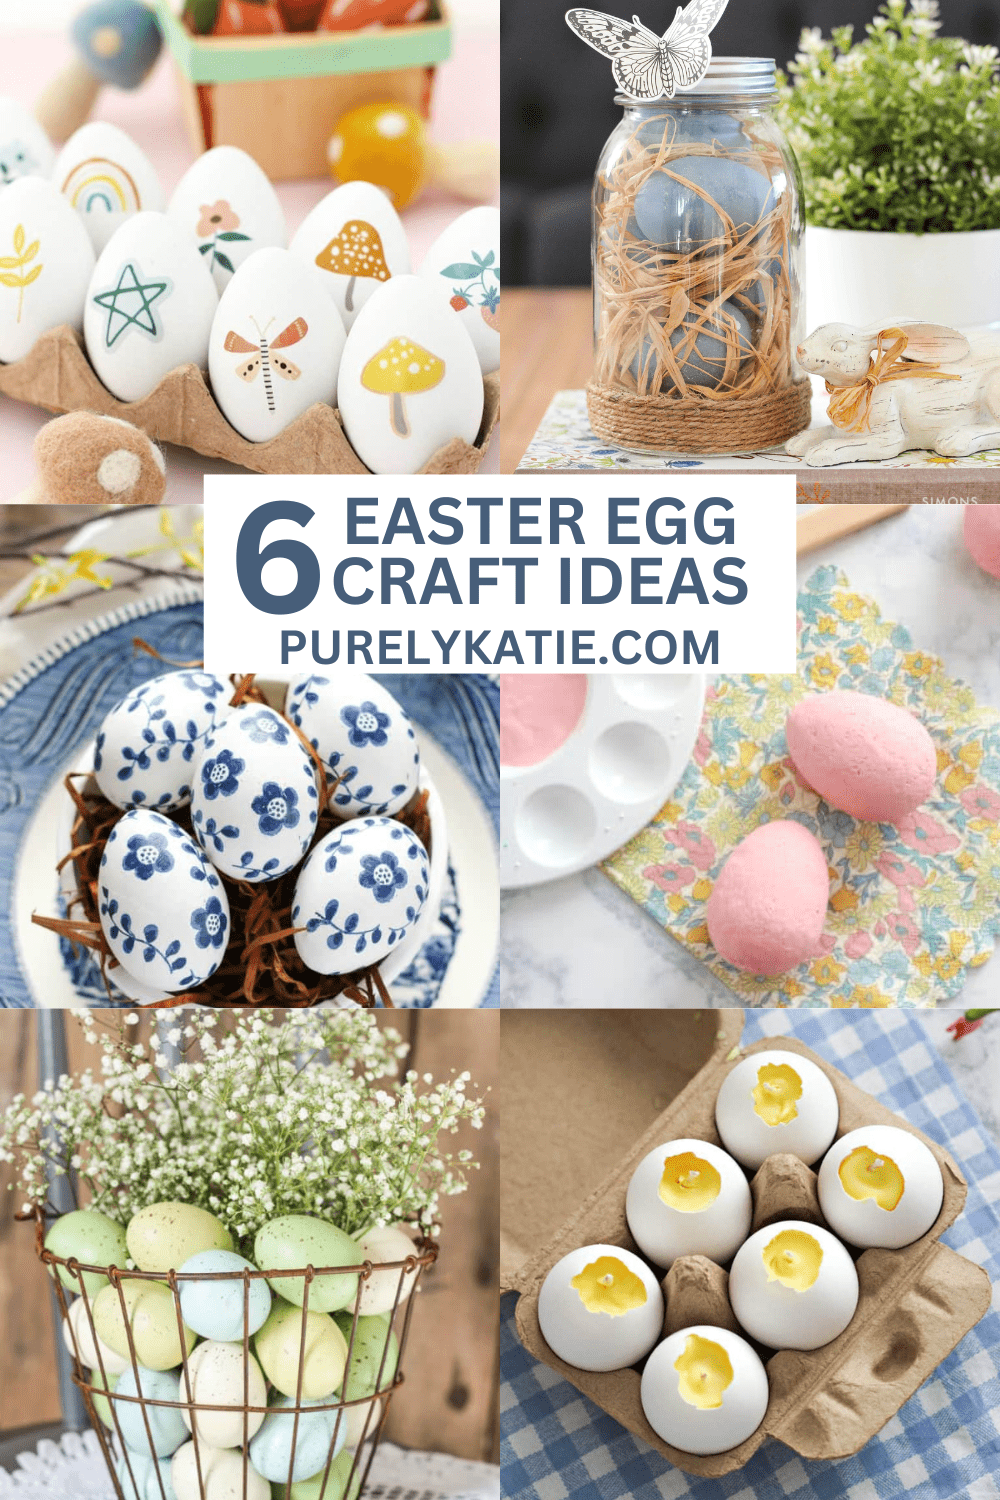 Easter Egg Craft Ideas That Are Easy To Make